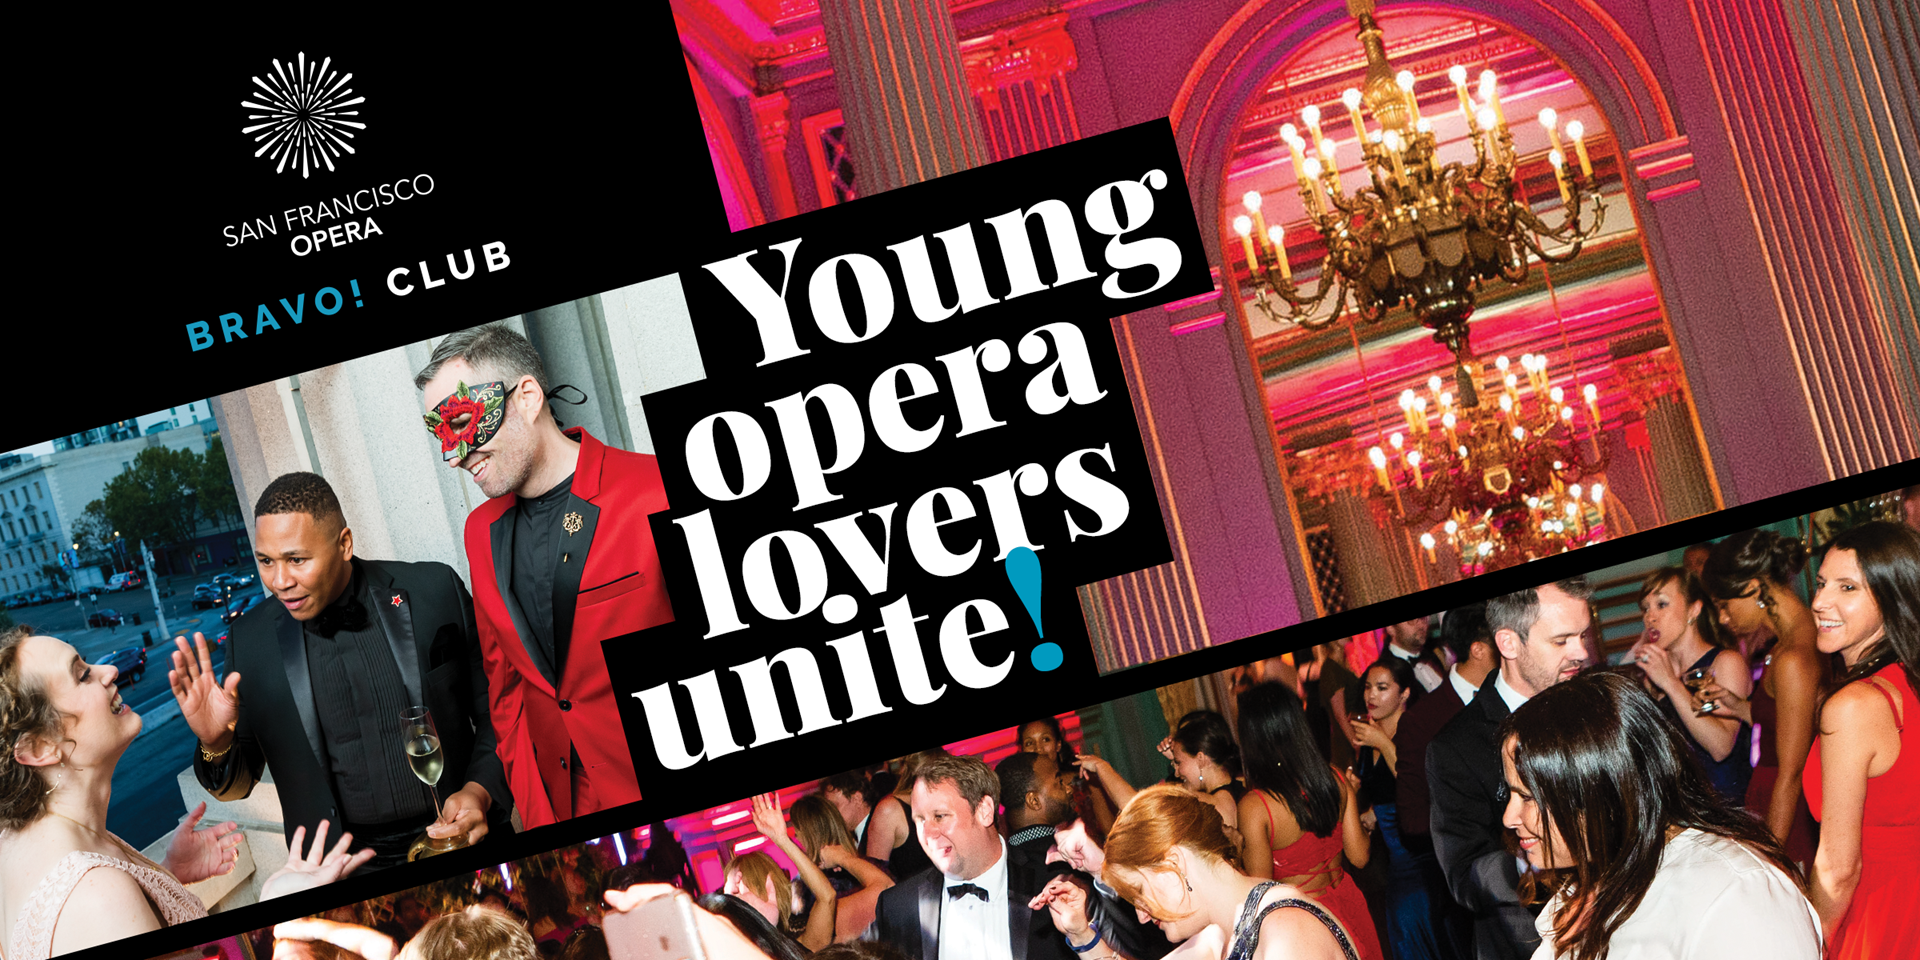 Image for Young Opera lovers and a group of people on a dance floor